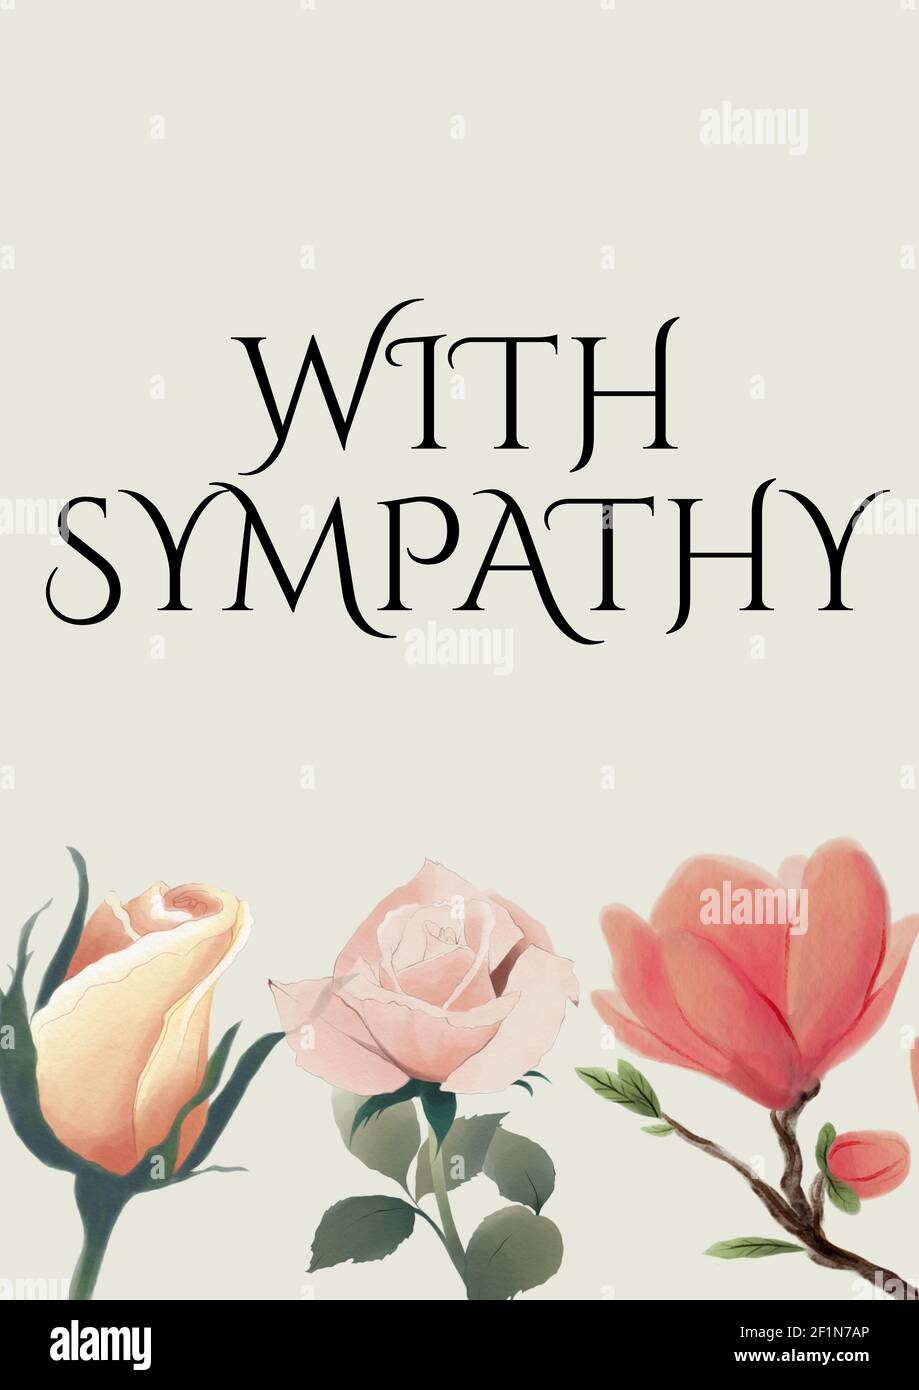 With sympathy text with illustration of flowers on cream background Stock Photo